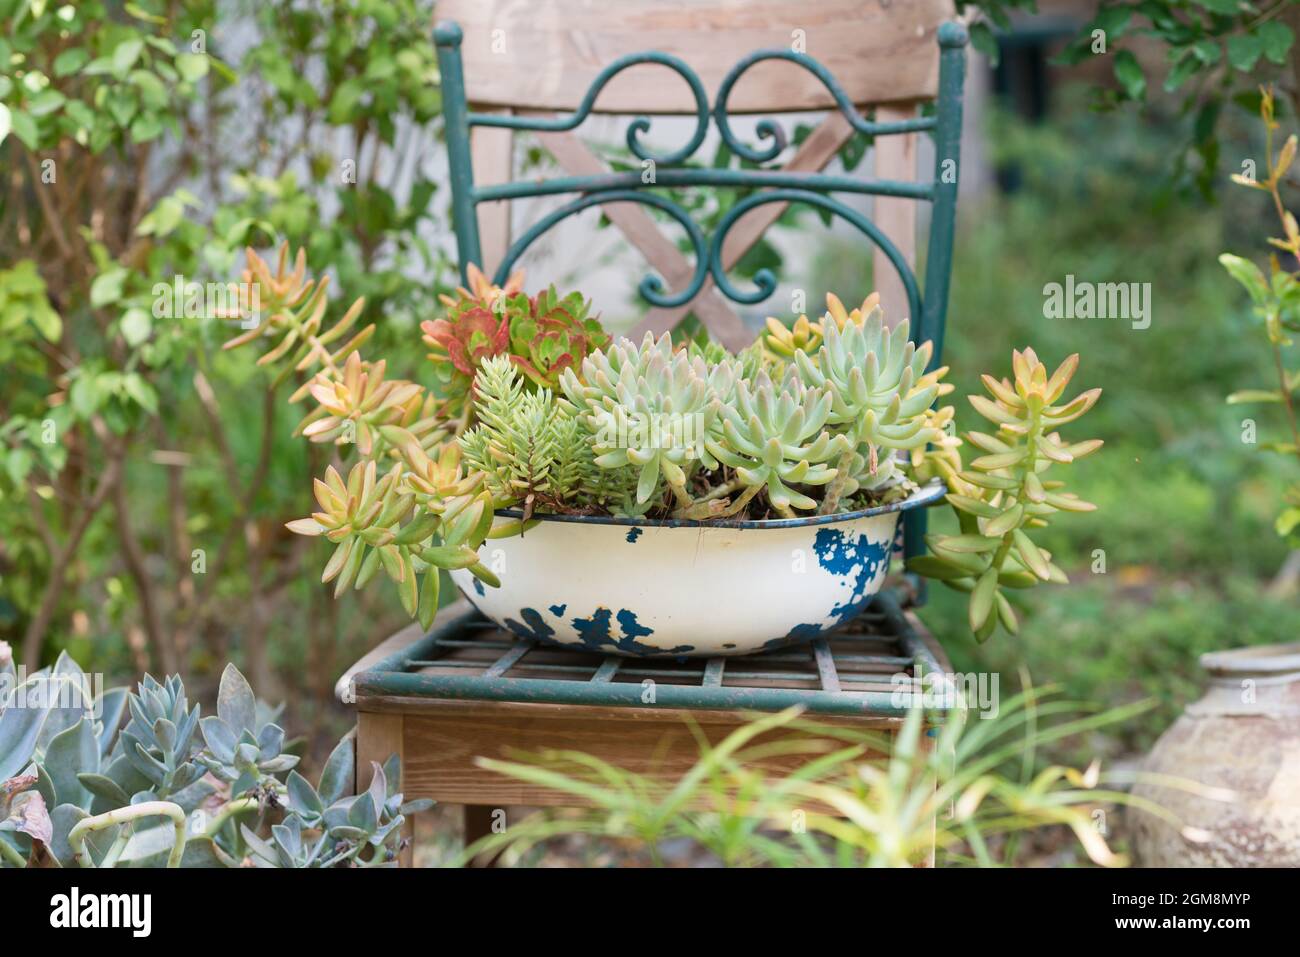 Reused garden design ideas. Old basin turn into garden flower pots. Recycled garden design, diy and low-waste lifestyle. Stock Photo